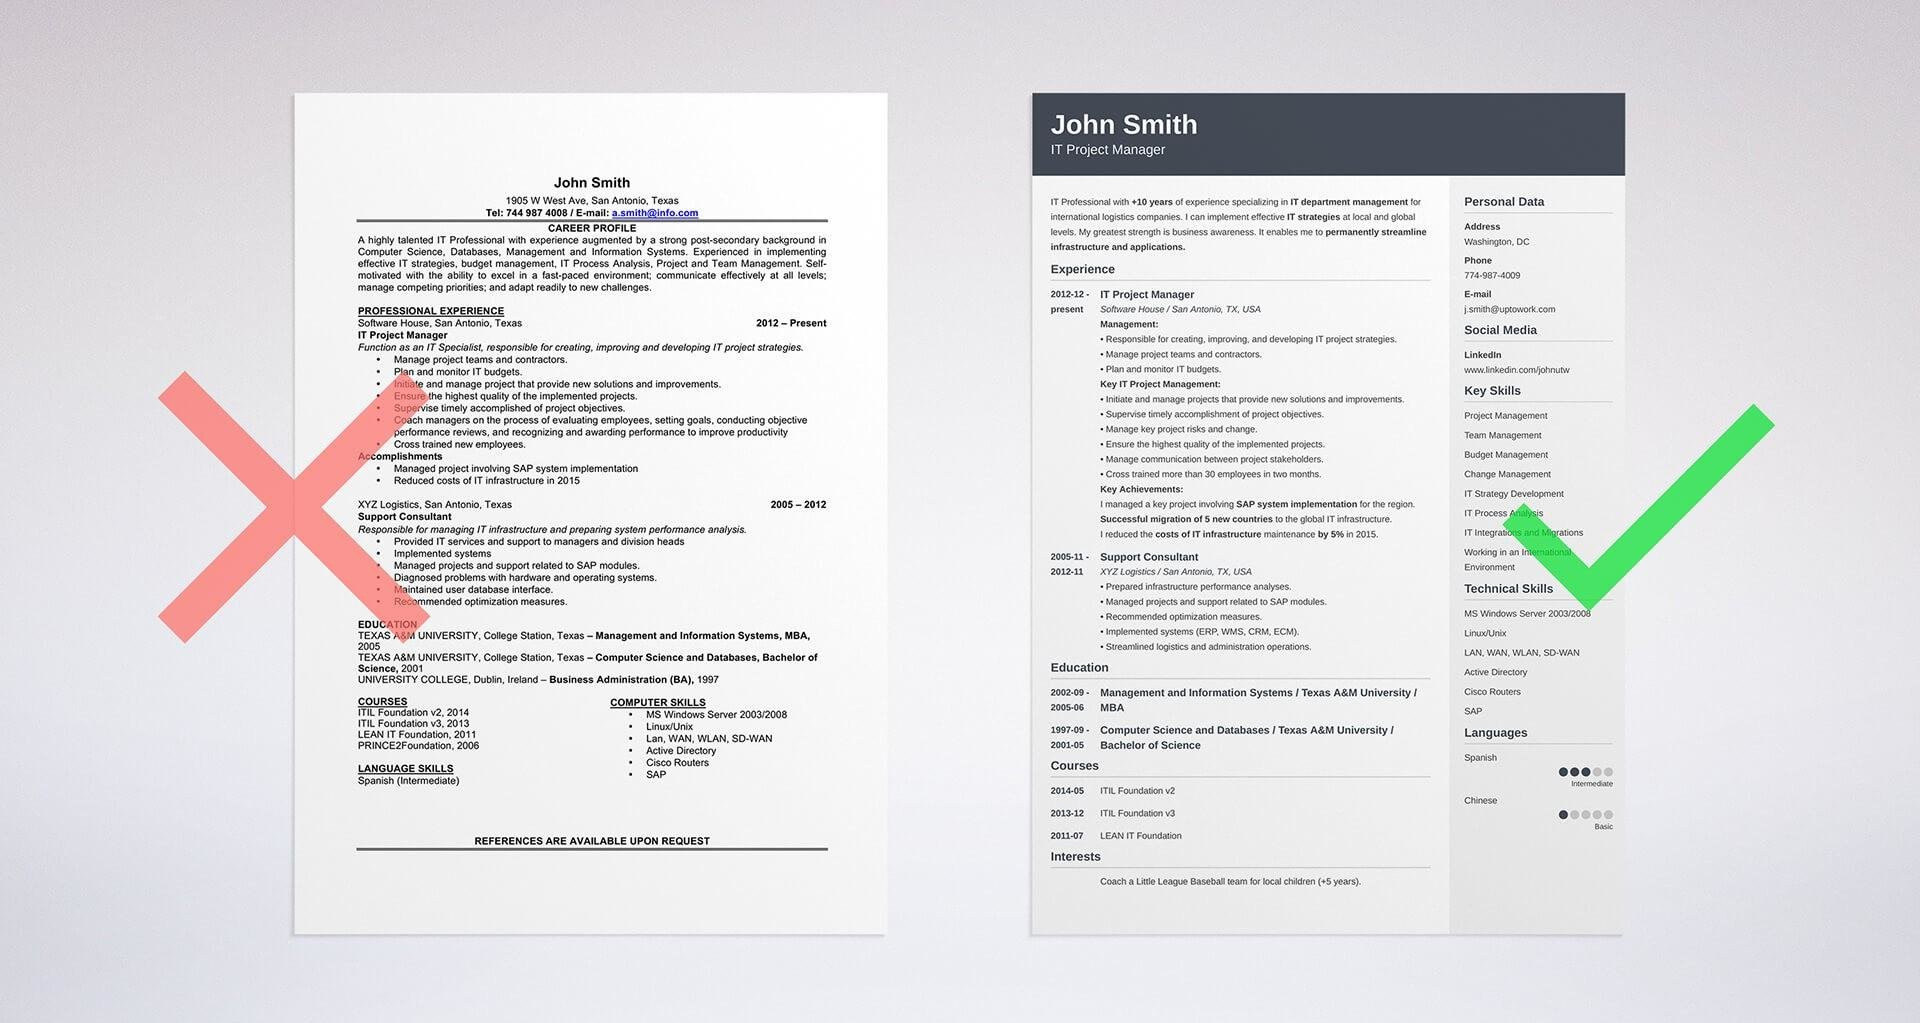 Sample Resume with Awards and Accomplishments Accomplishments for A Resume: Key Achievements & Awards